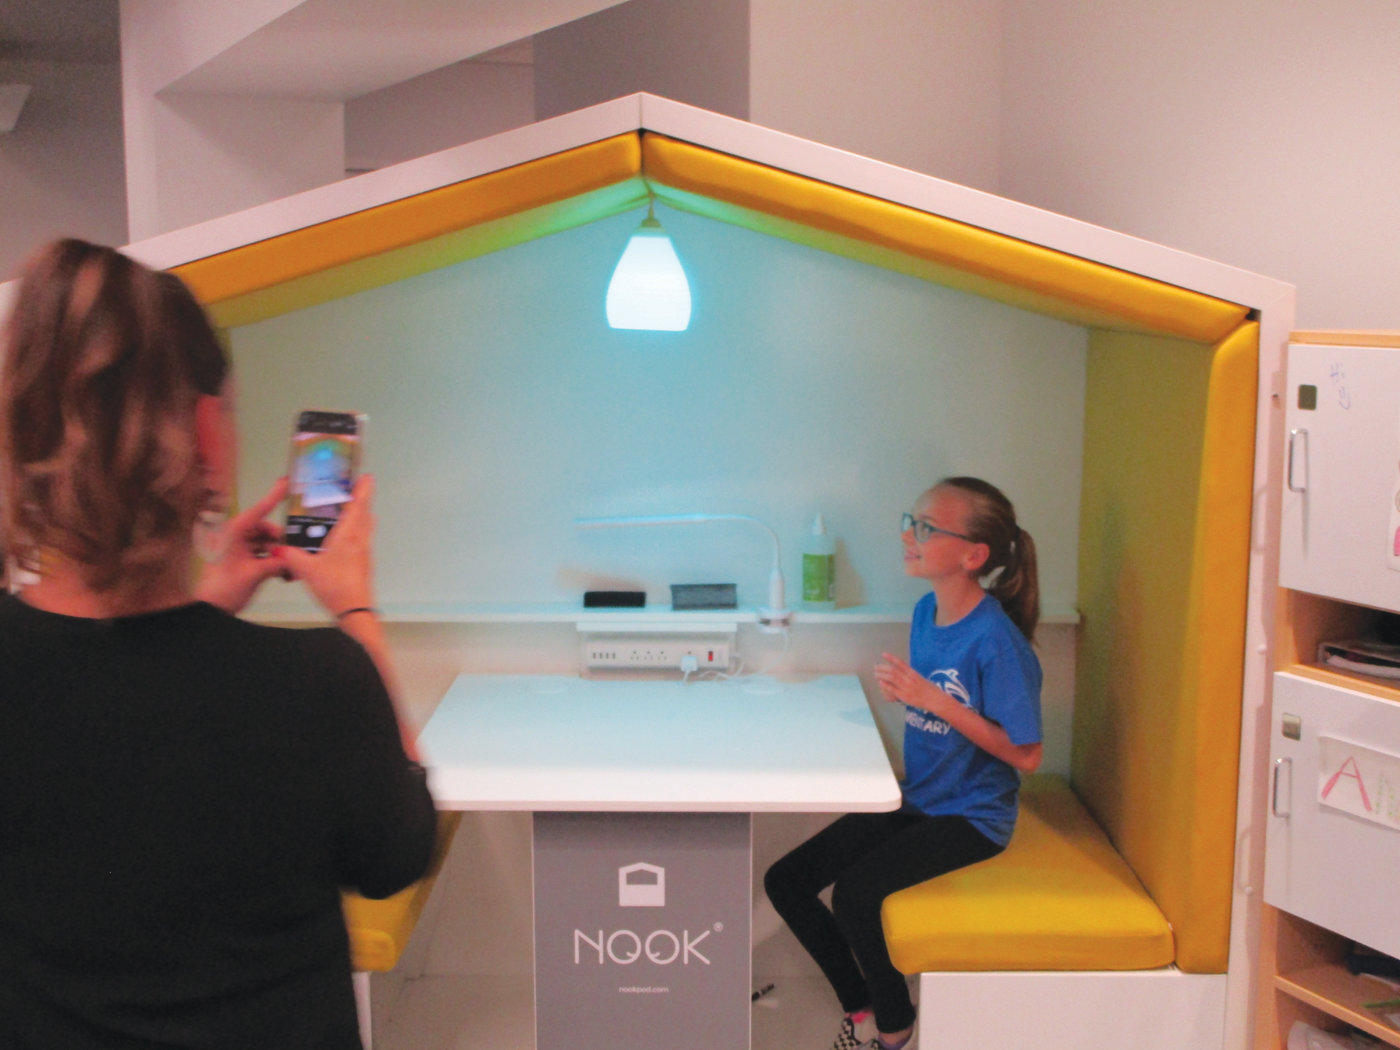 LEARNING NOOK: Fifth-grade student Ava Chiarello demonstrates the learning nook that is part of the new Learning Community wing at Eden Park Elementary School.